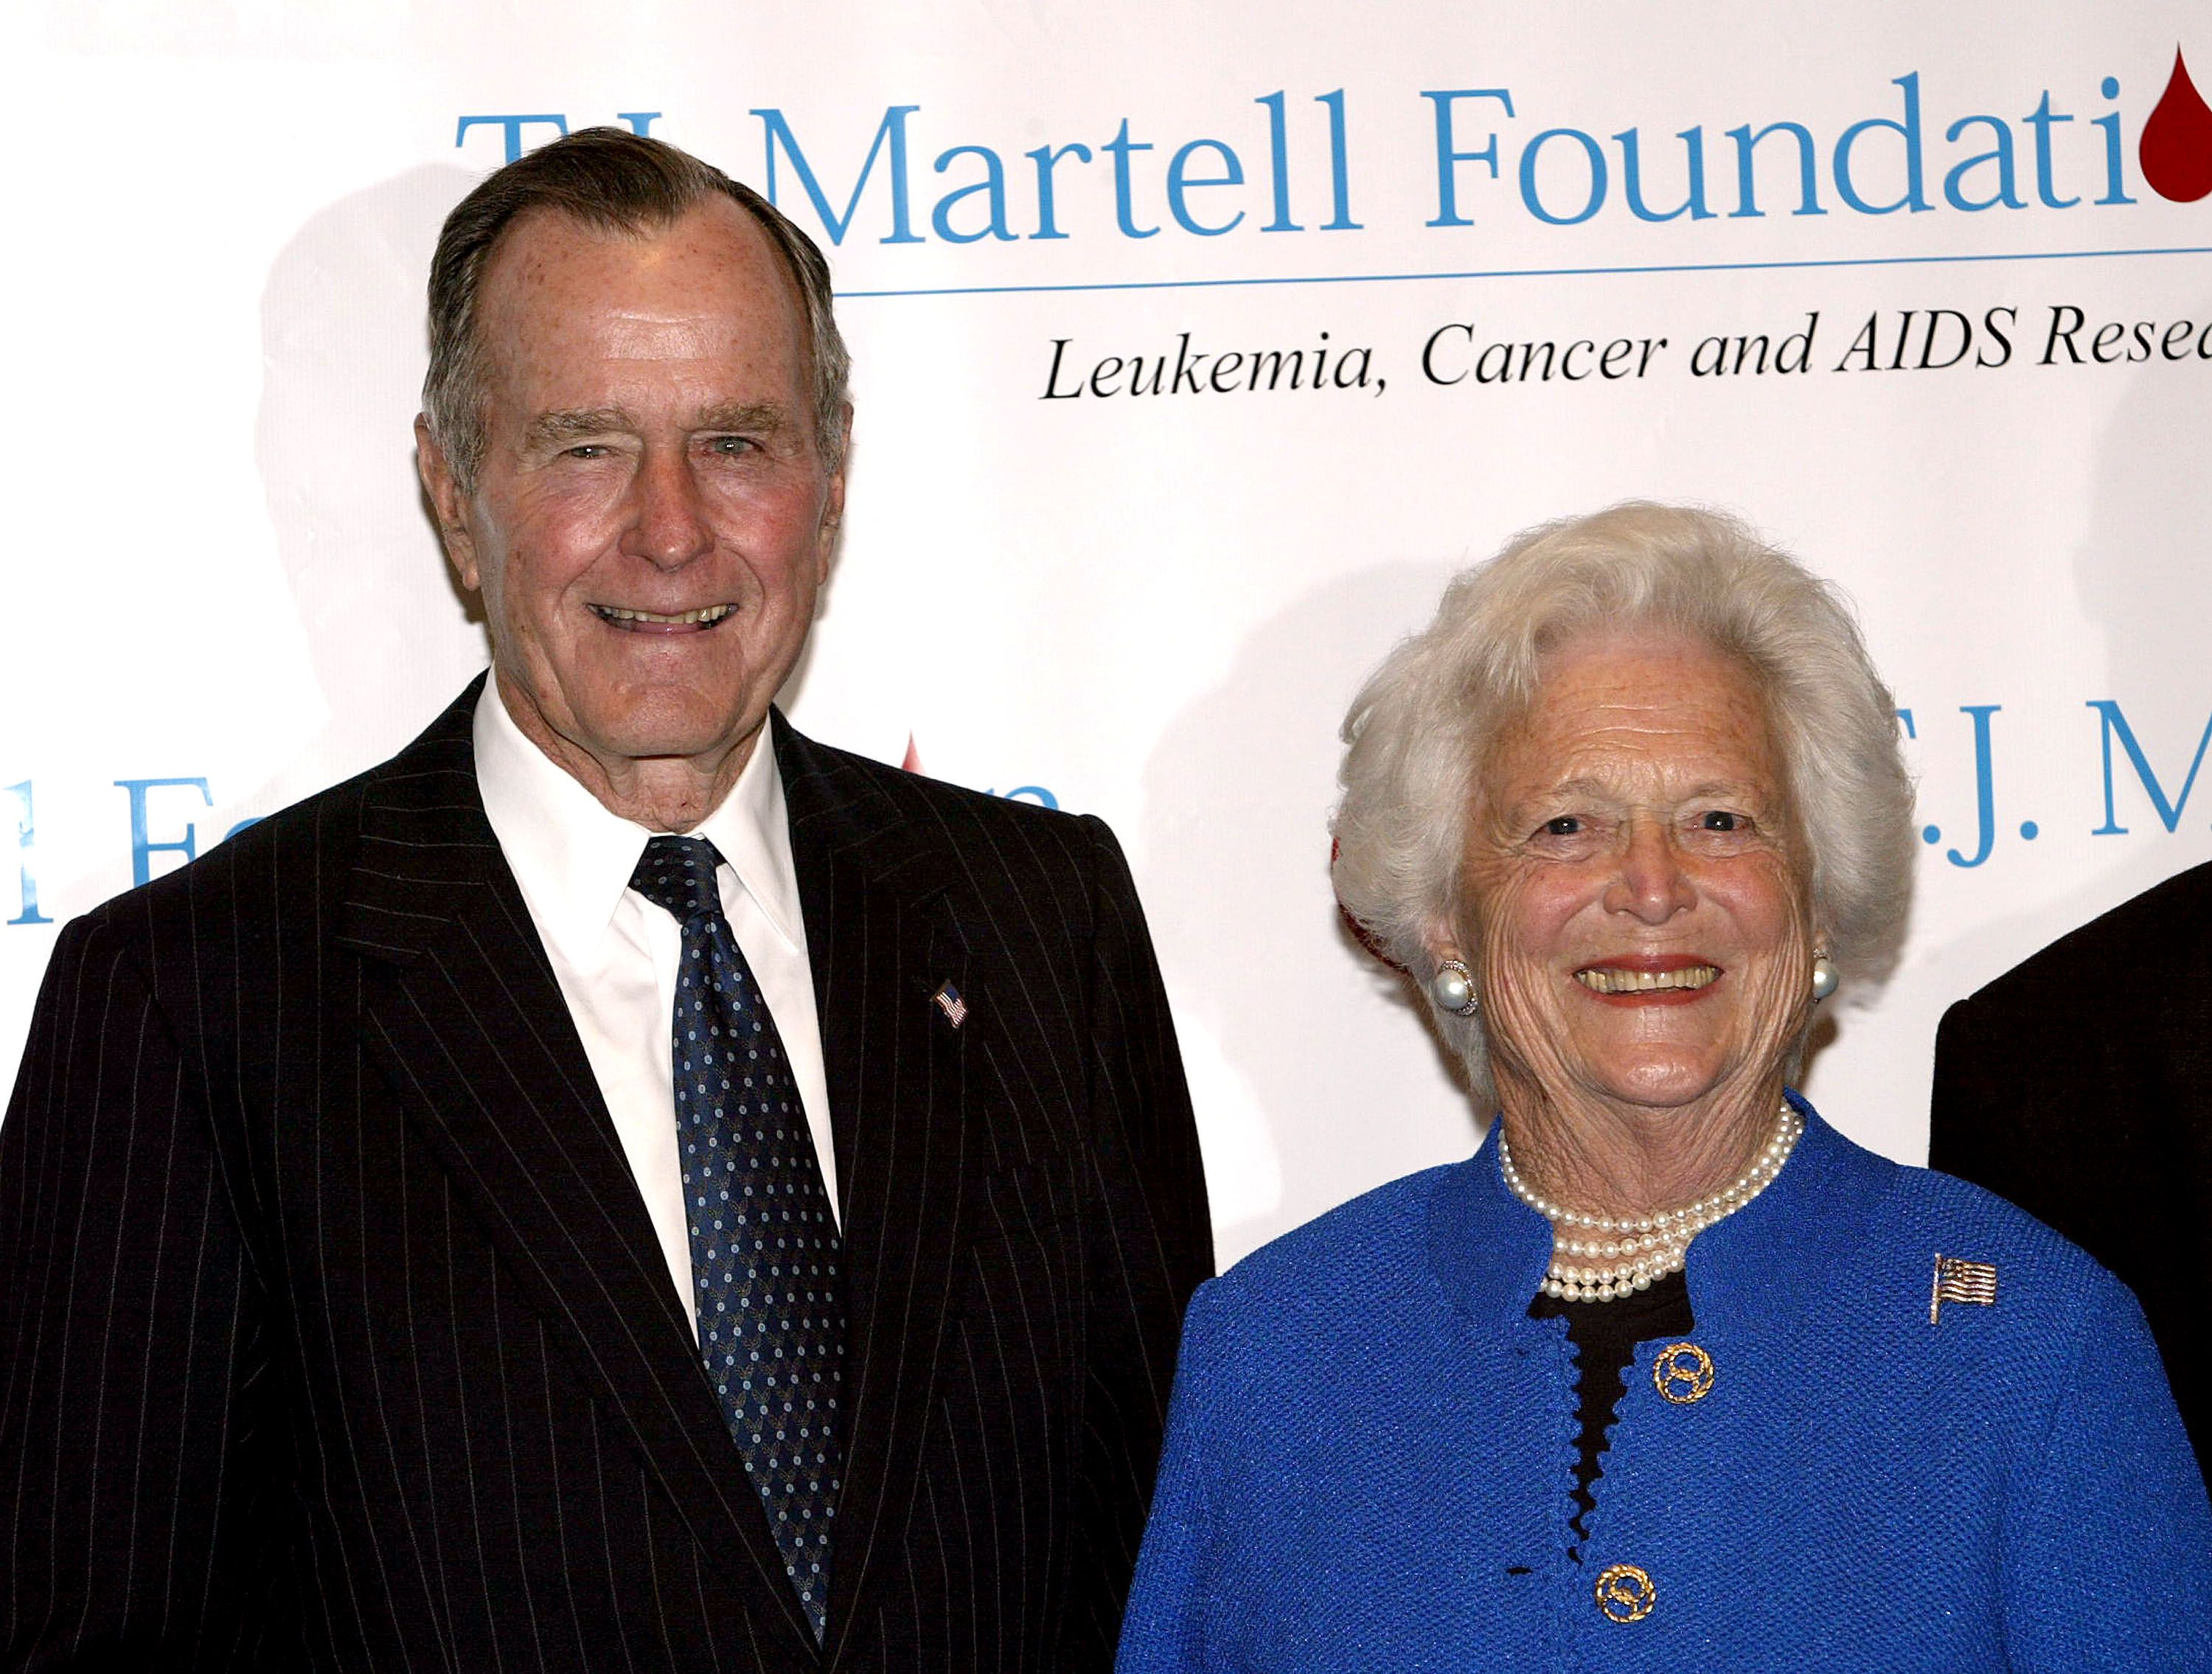 Former President George H. W. Bush and his wife Barbara at the 29th Annual T.J. Martell Foundation Awards Gala at the New York Hilton May 27, 2004 | Photo: Getty Images